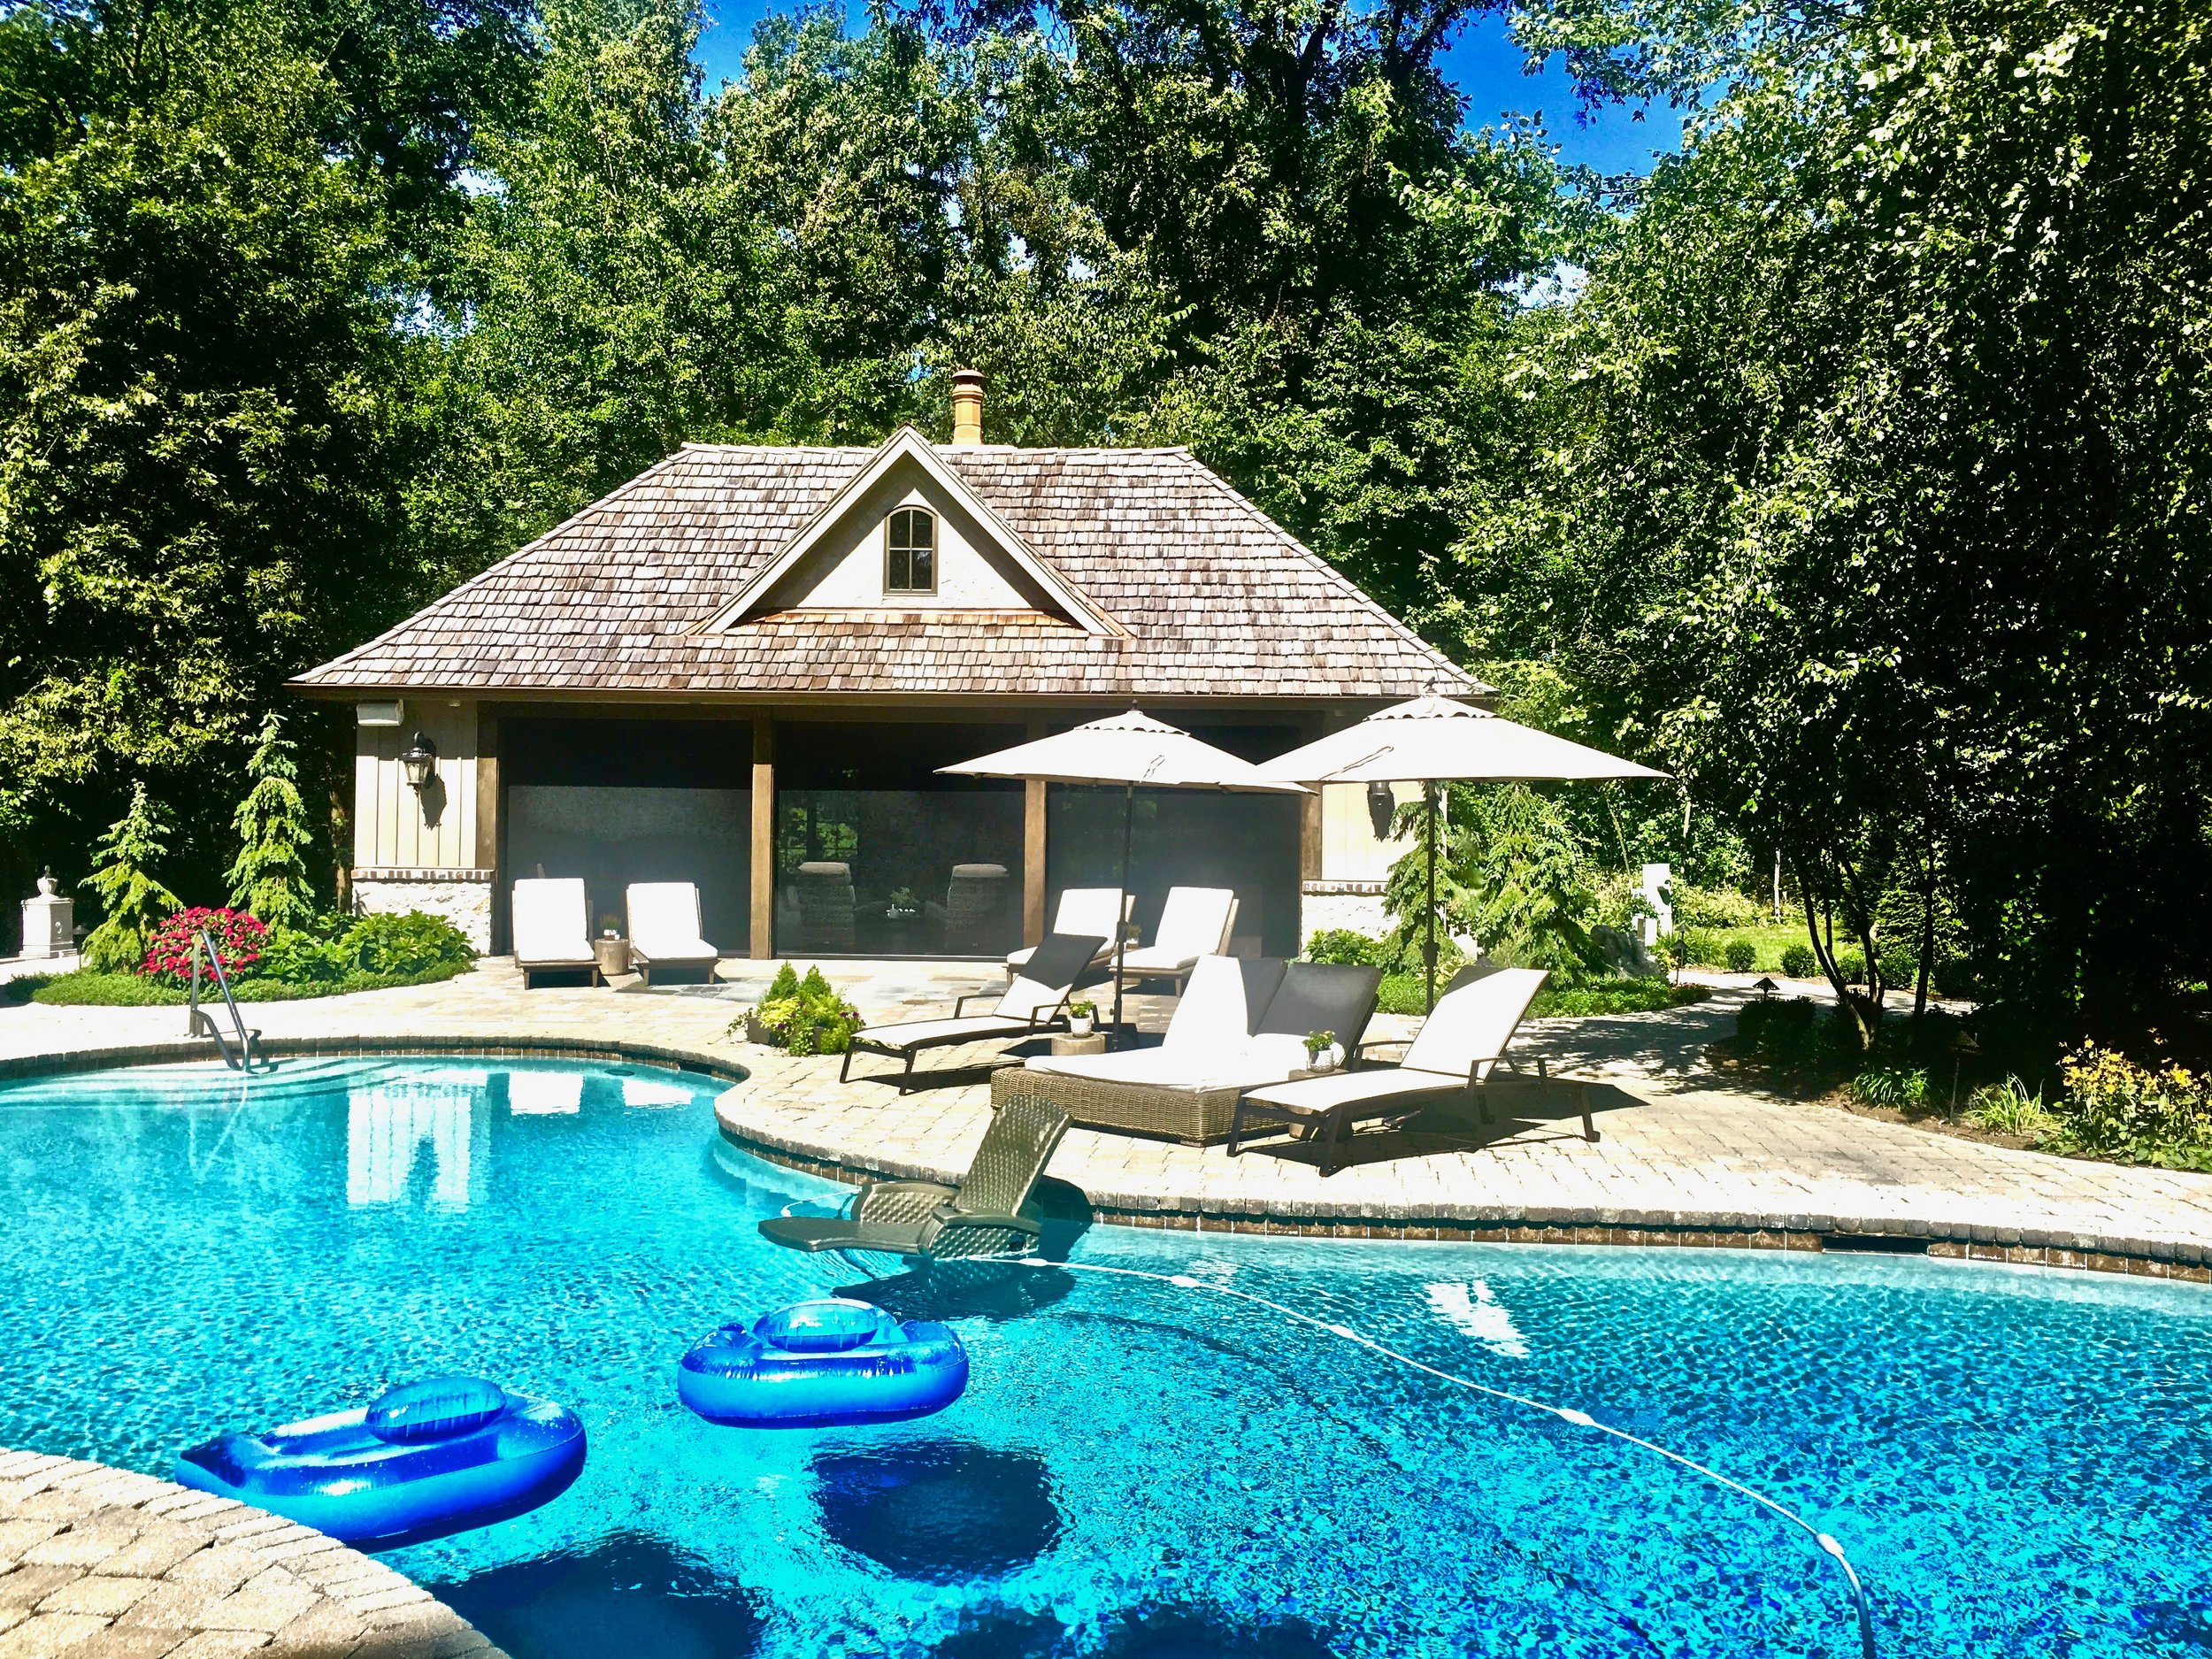 Custom Pool House to Match Main House, French Country Style Stucco Exterior